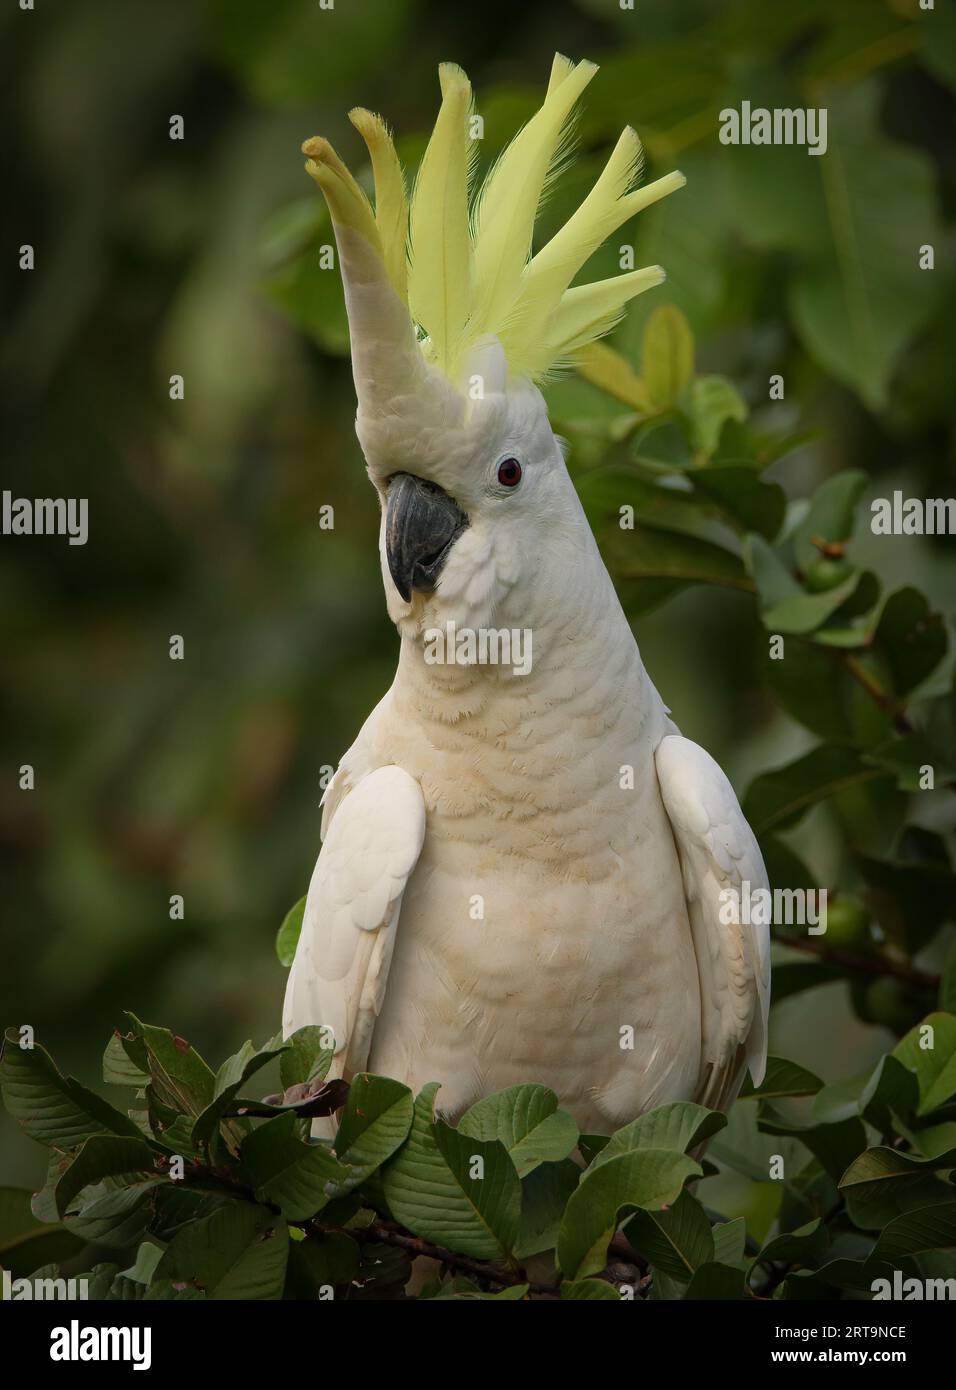 A Sulphur-Crested Cockatoo is showing off its crest. Northern Territory, Australia. Stock Photo